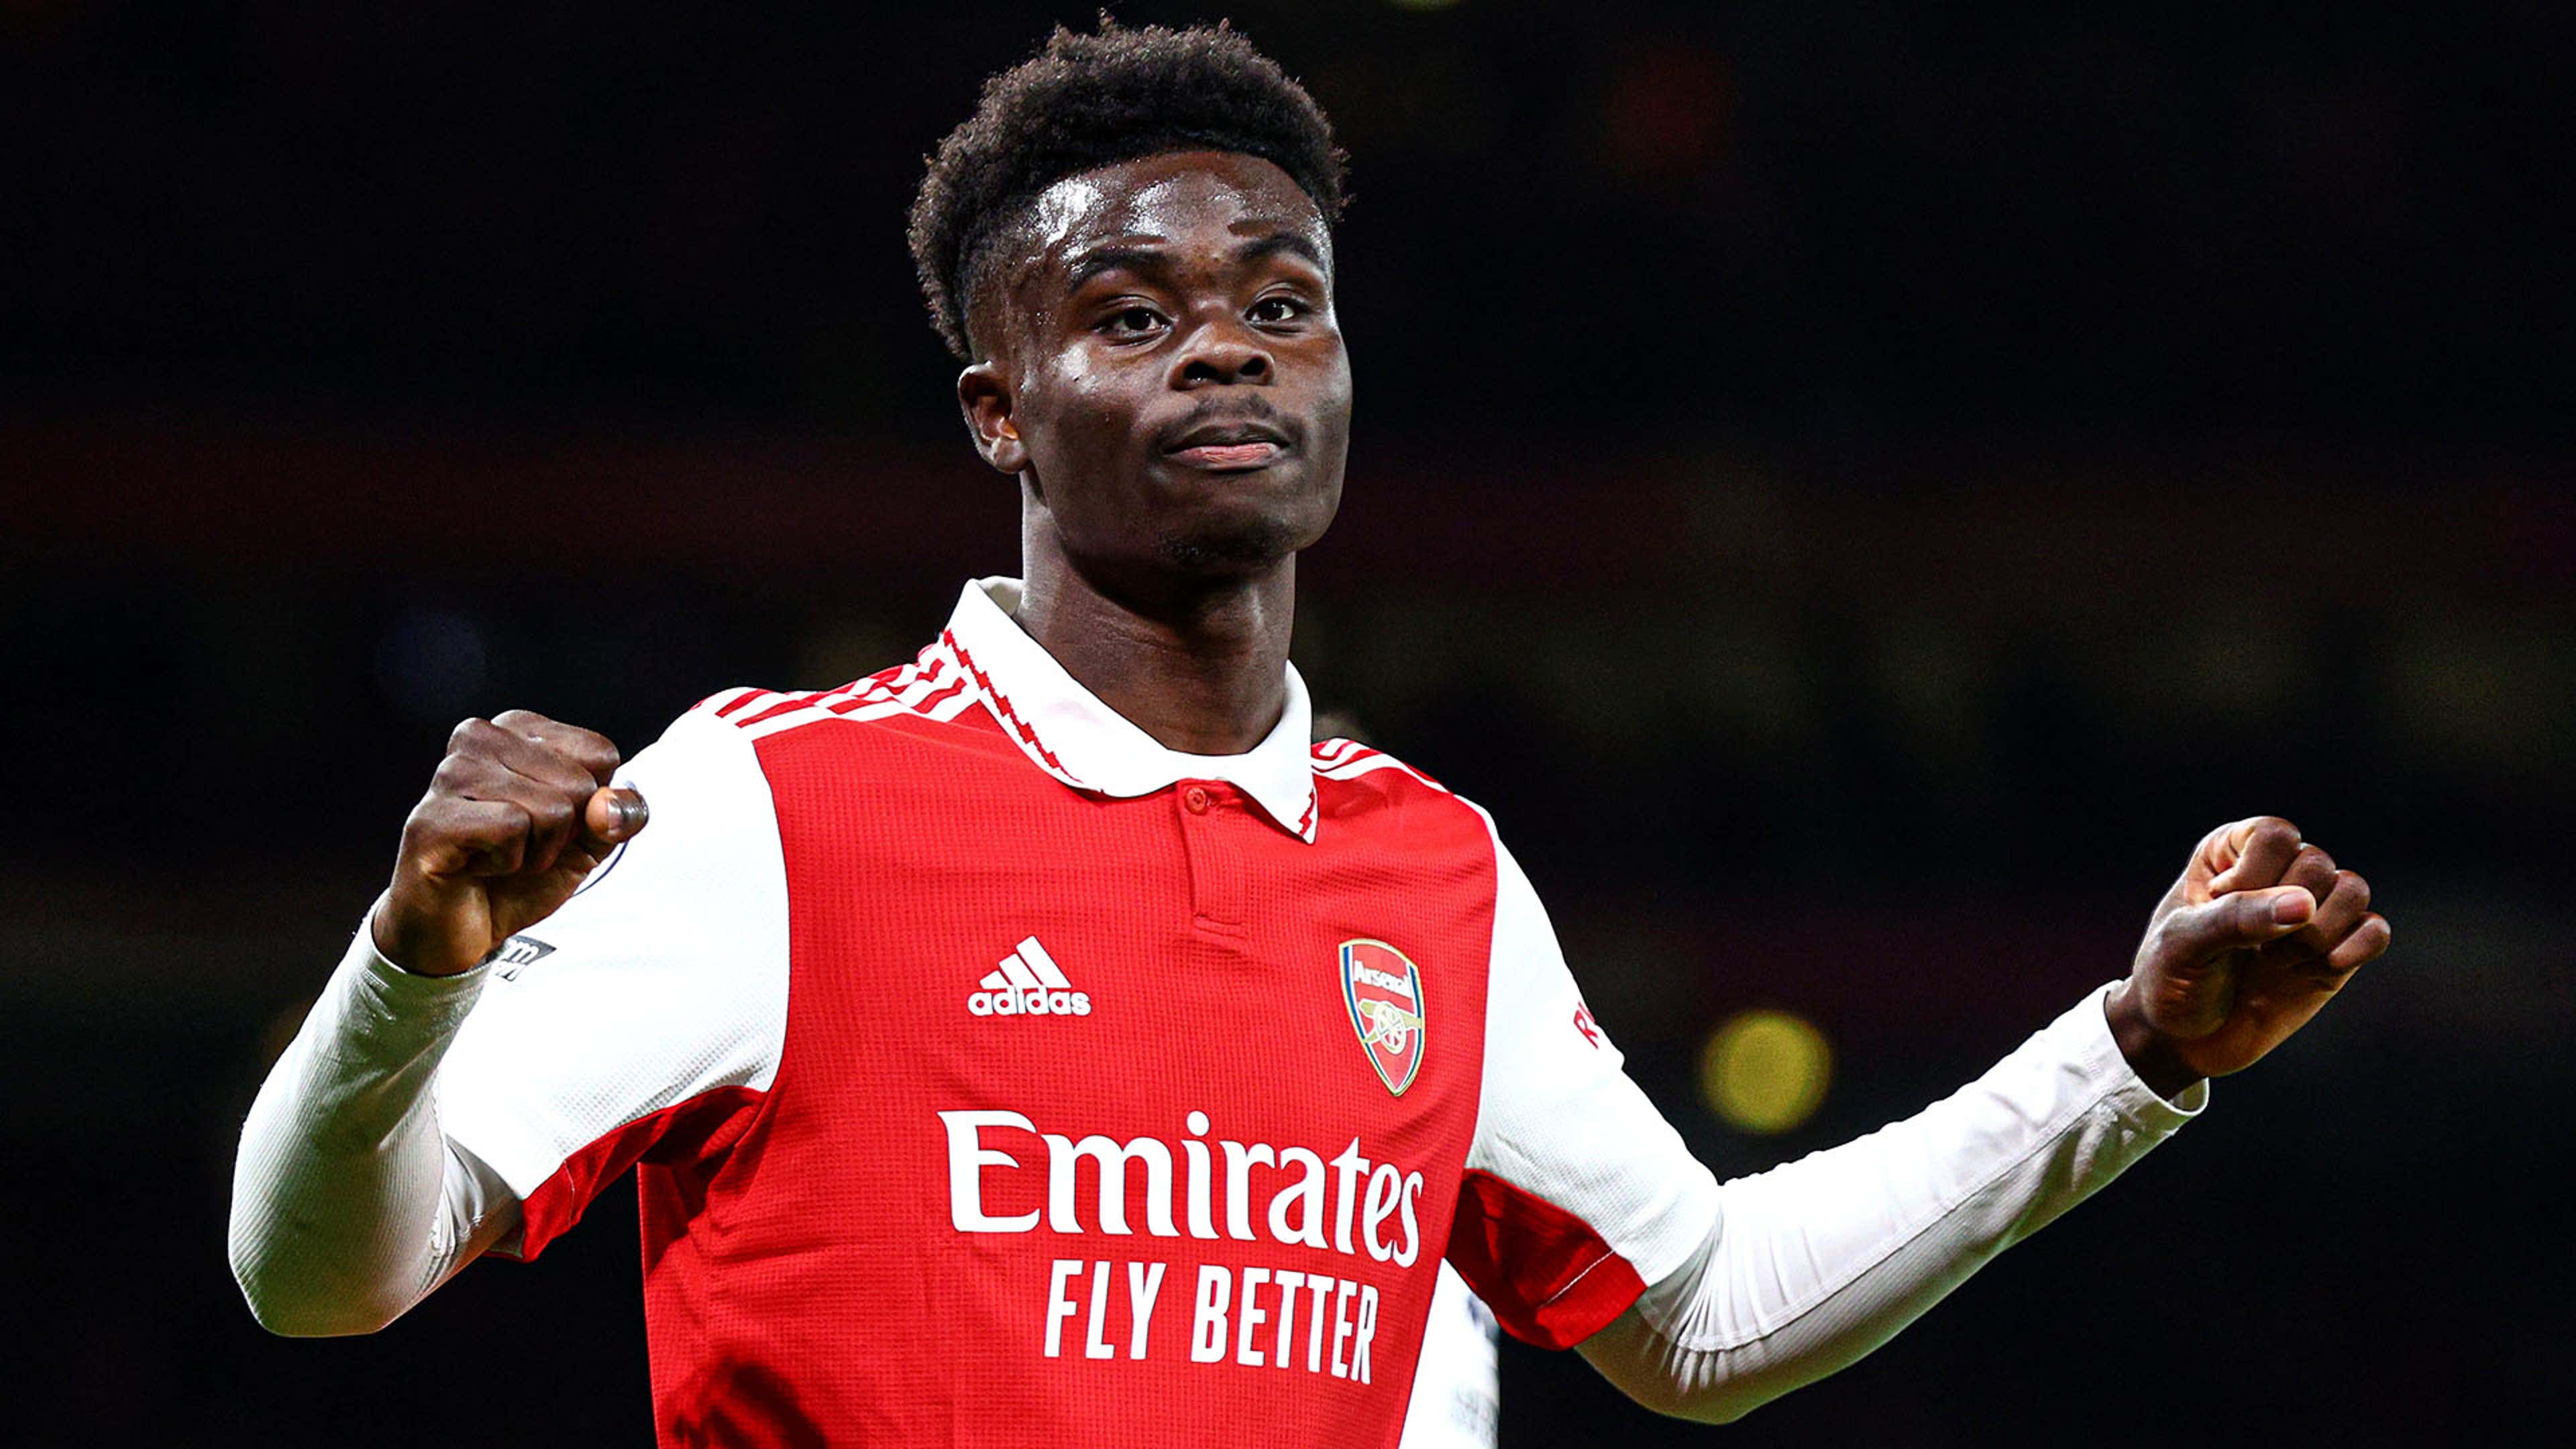 WATCH: No stopping that! Bukayo Saka blasts Arsenal into the lead against  Everton with fine goal | Goal.com